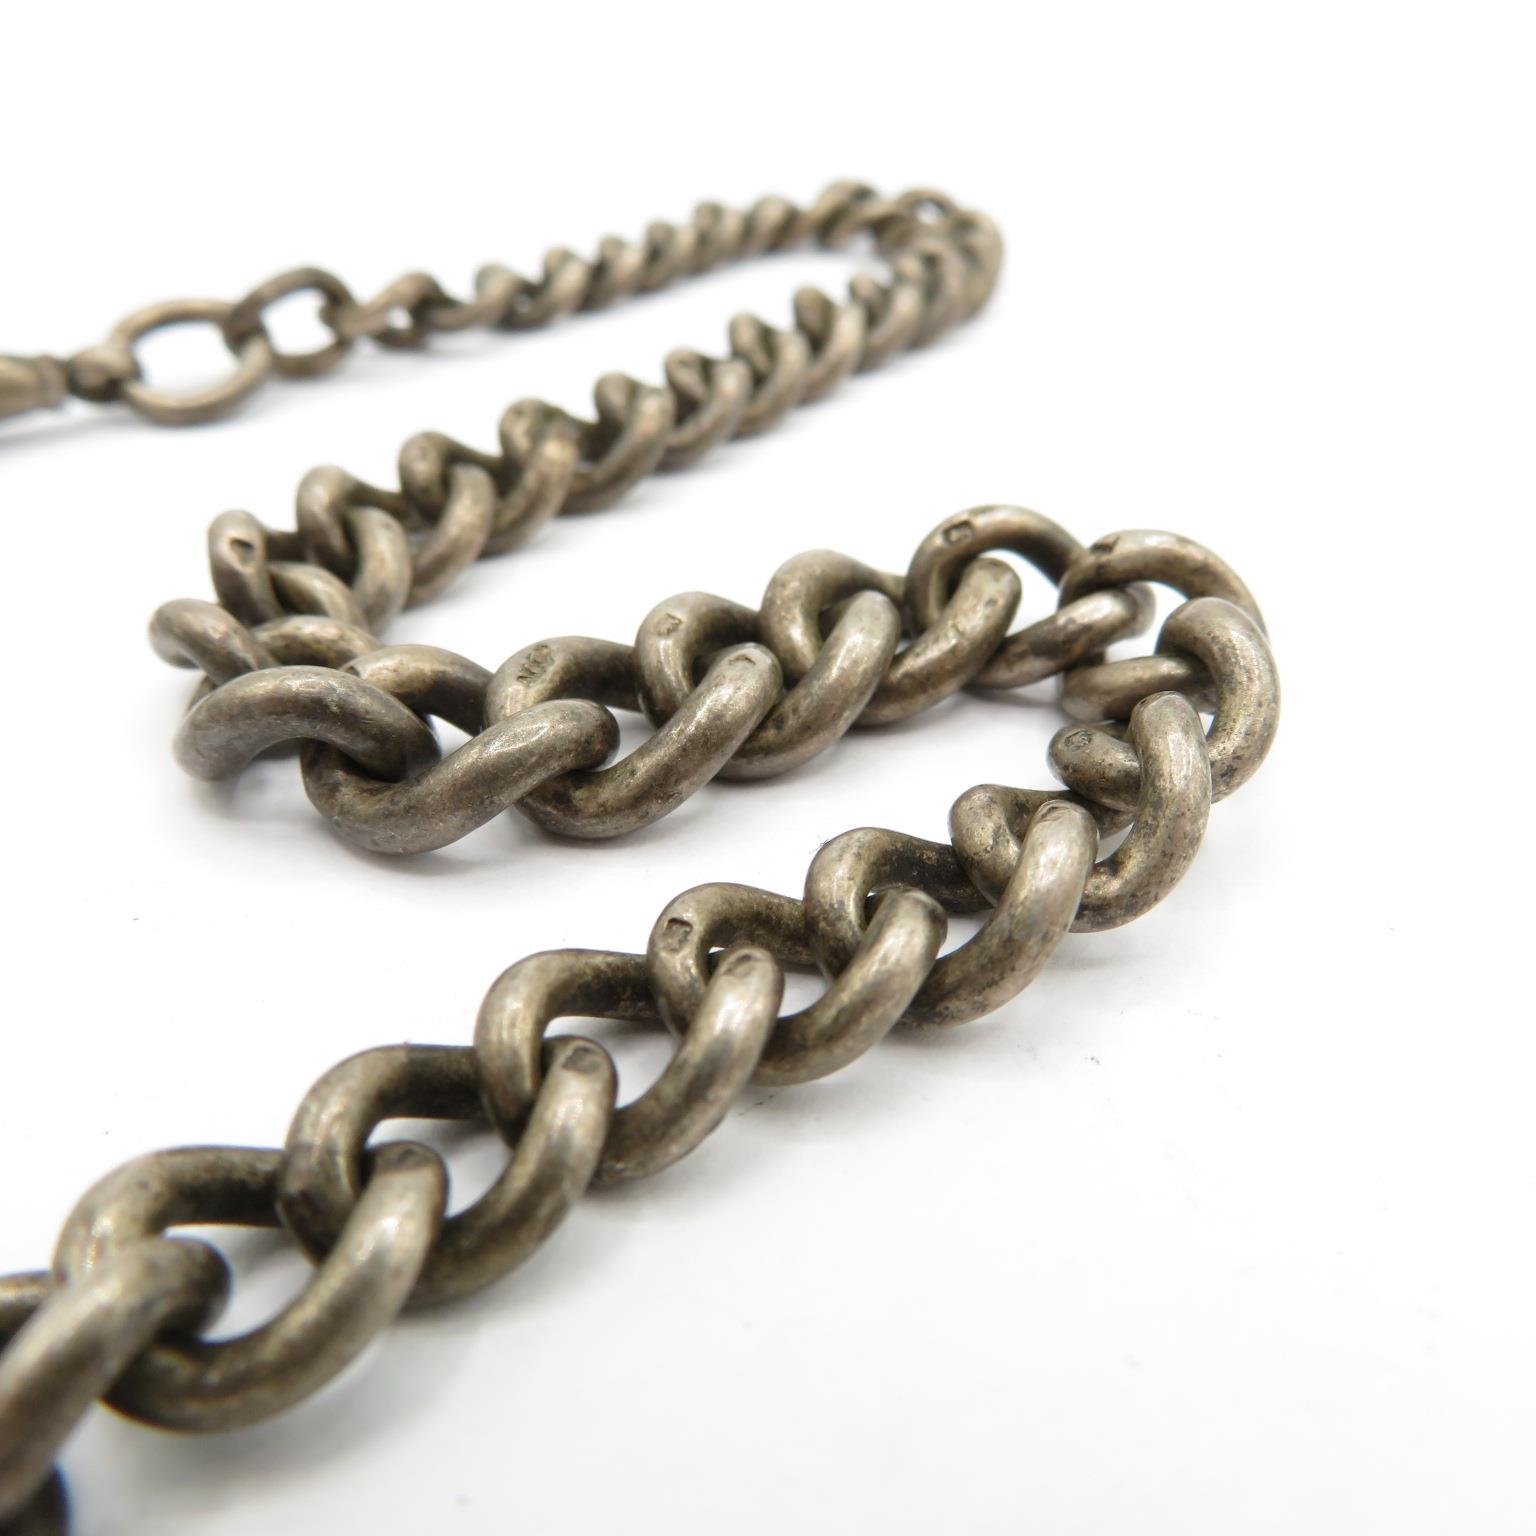 Watch chain and fob 30cm long 61g - Image 4 of 5